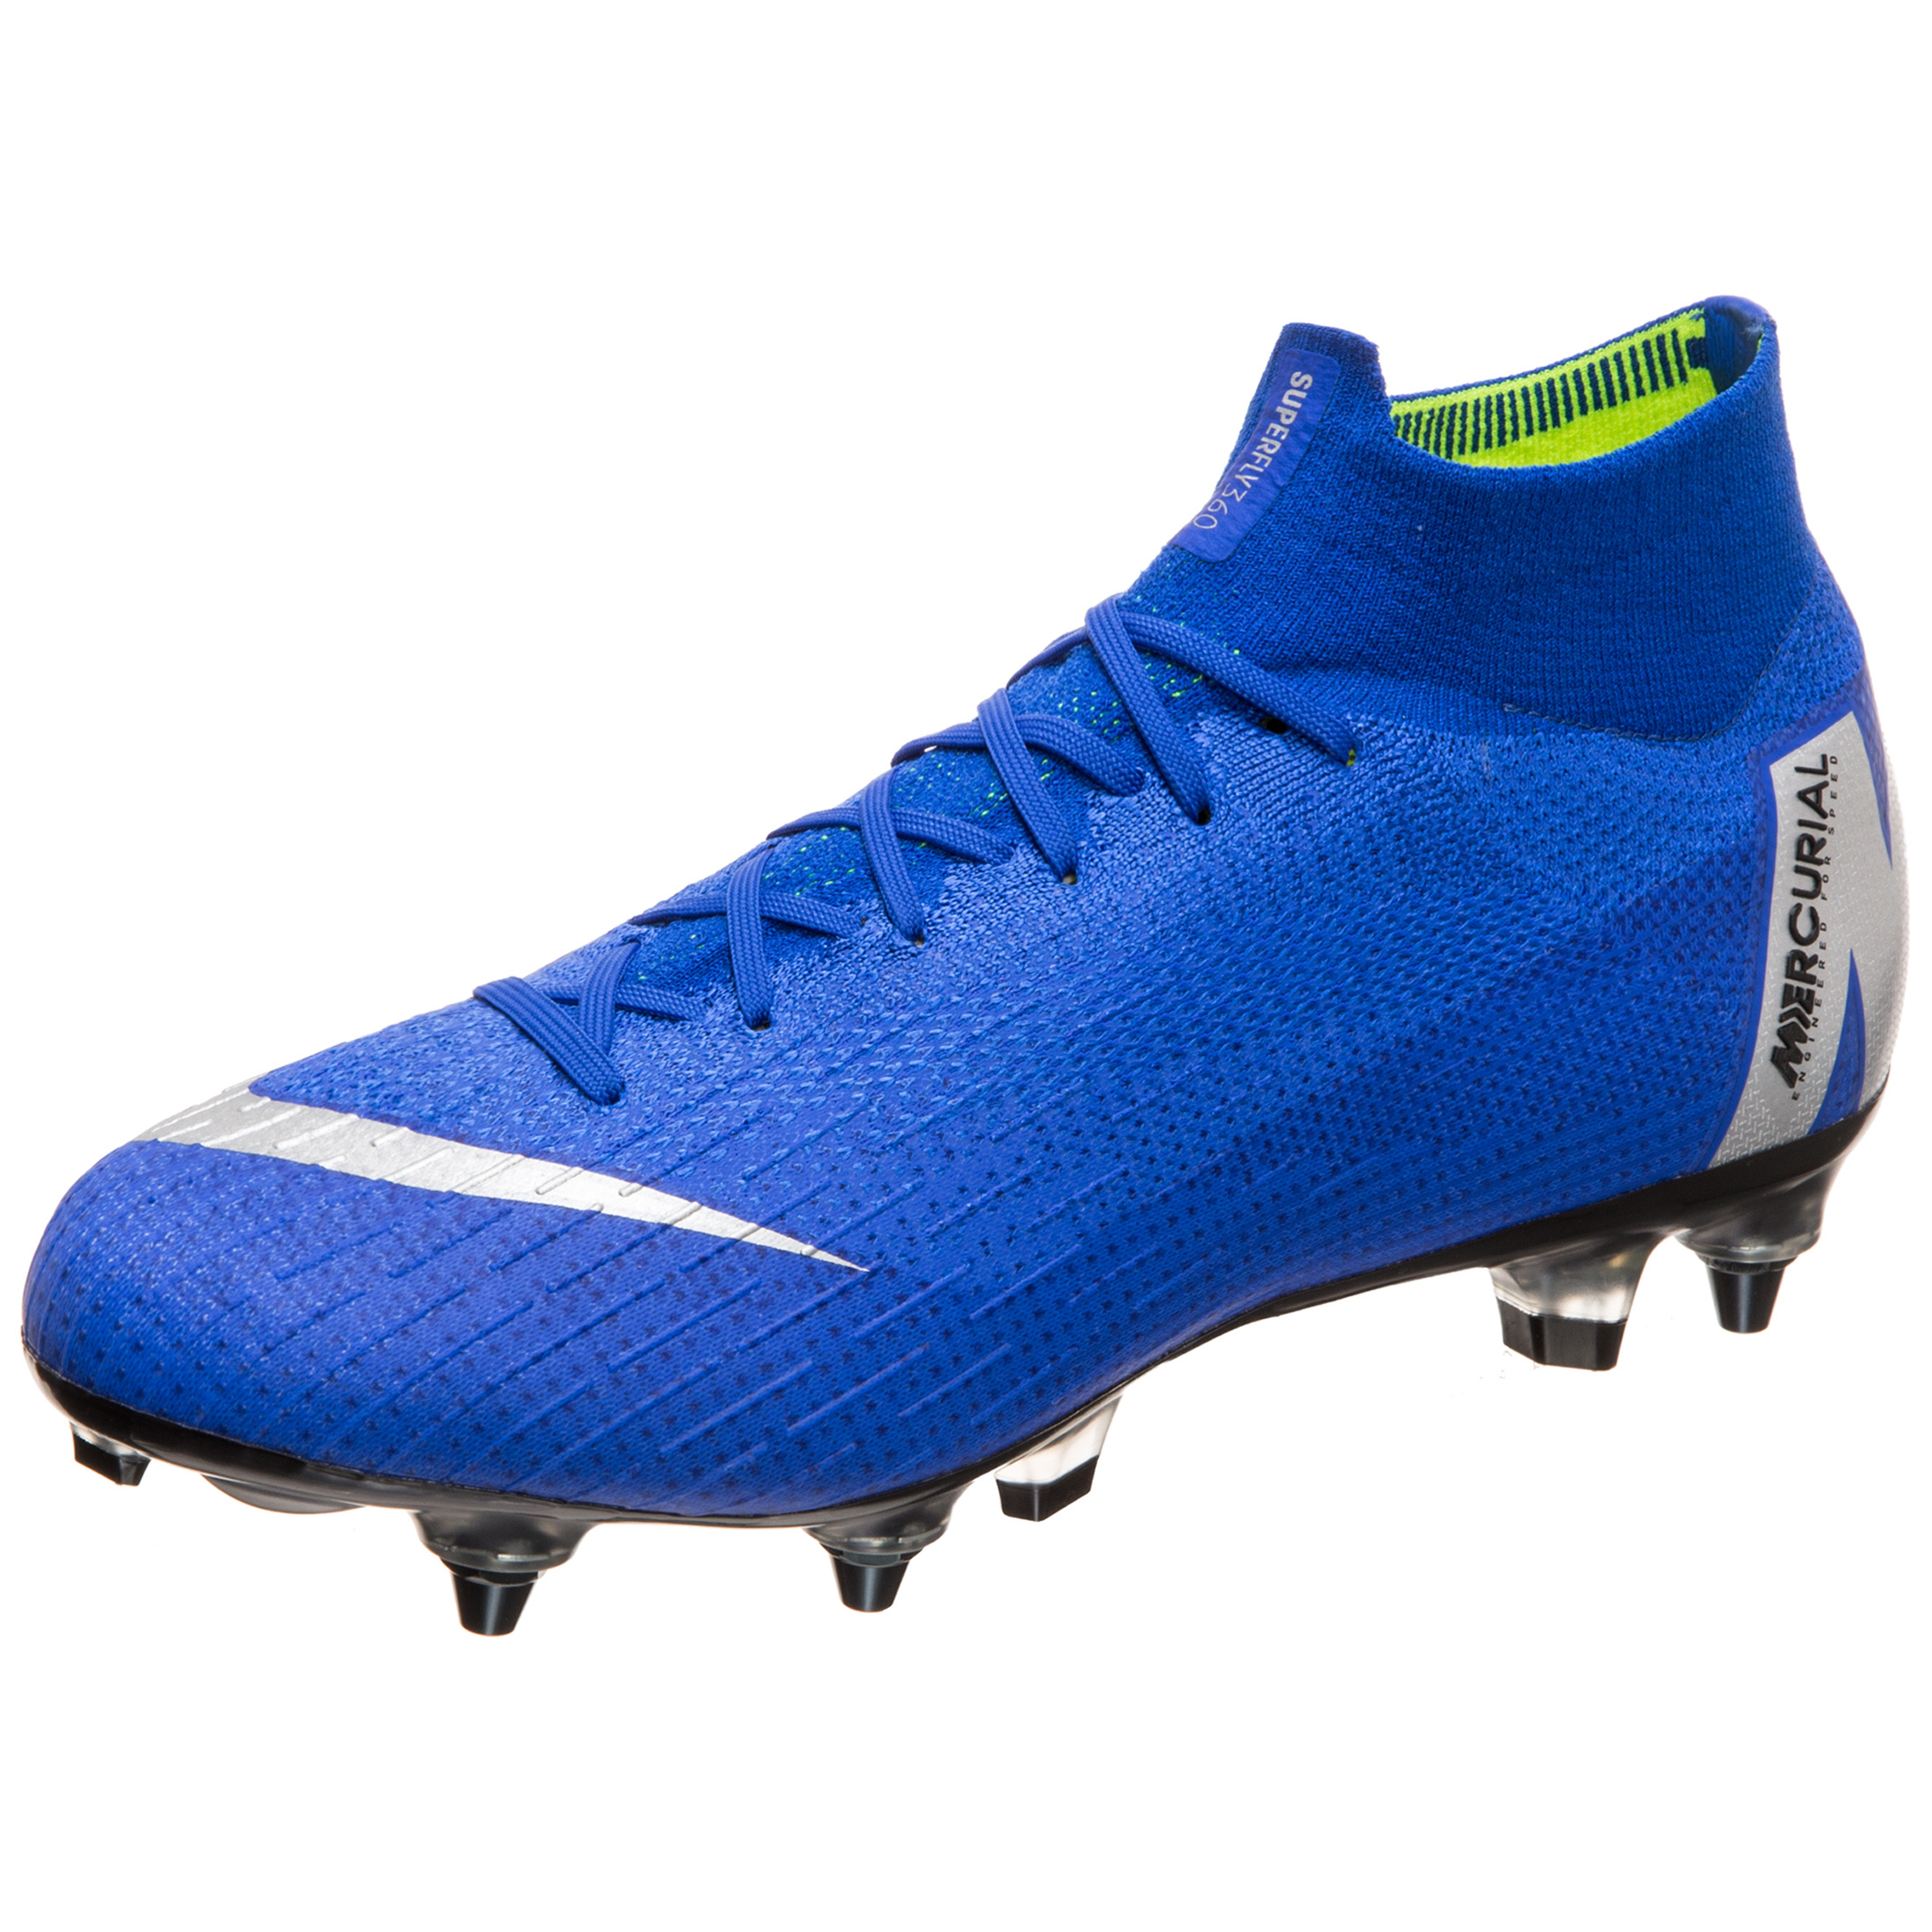 Nike Mercurial Superfly VI Pro CR7 Firm Ground Soccer Cleat